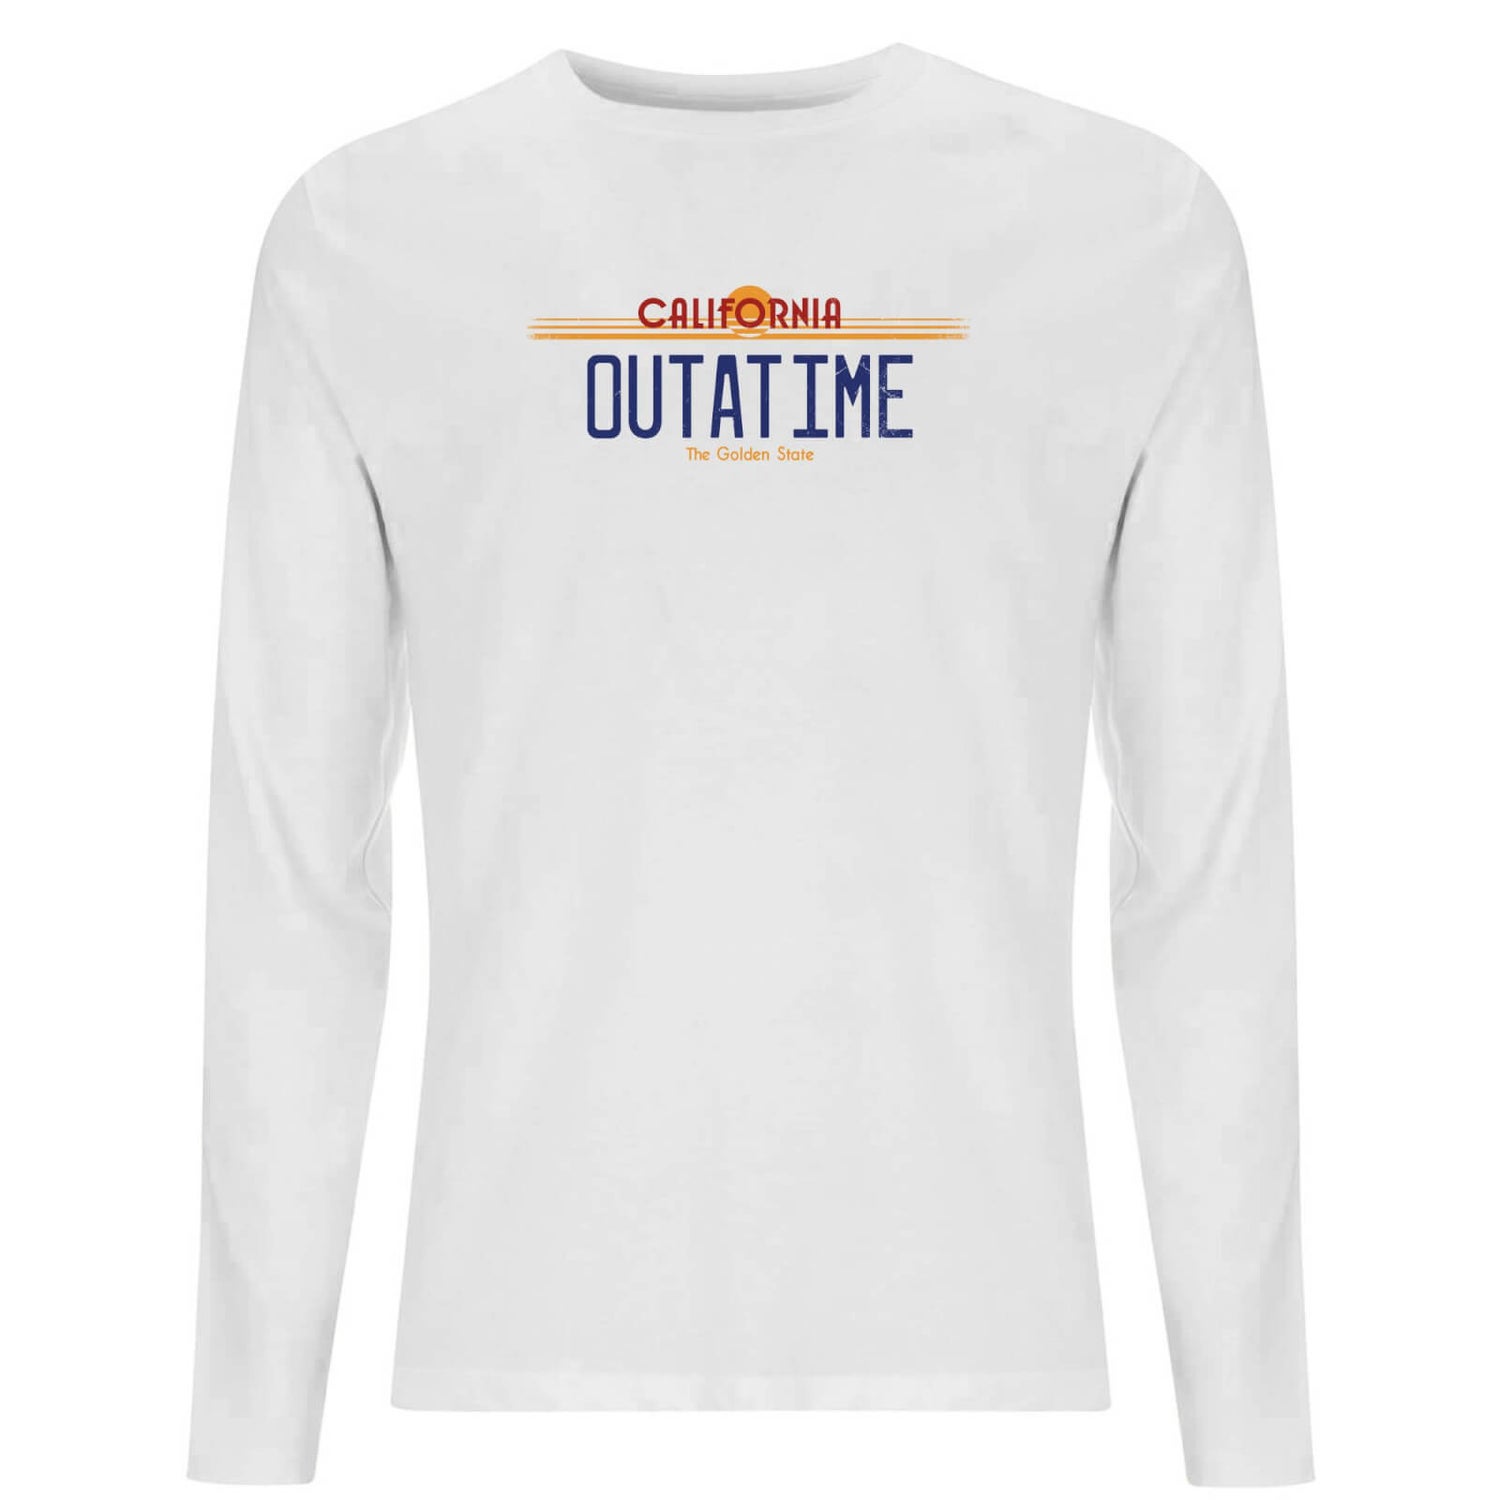 Back To The Future Outatime Plate Men's Long Sleeve T-Shirt - White